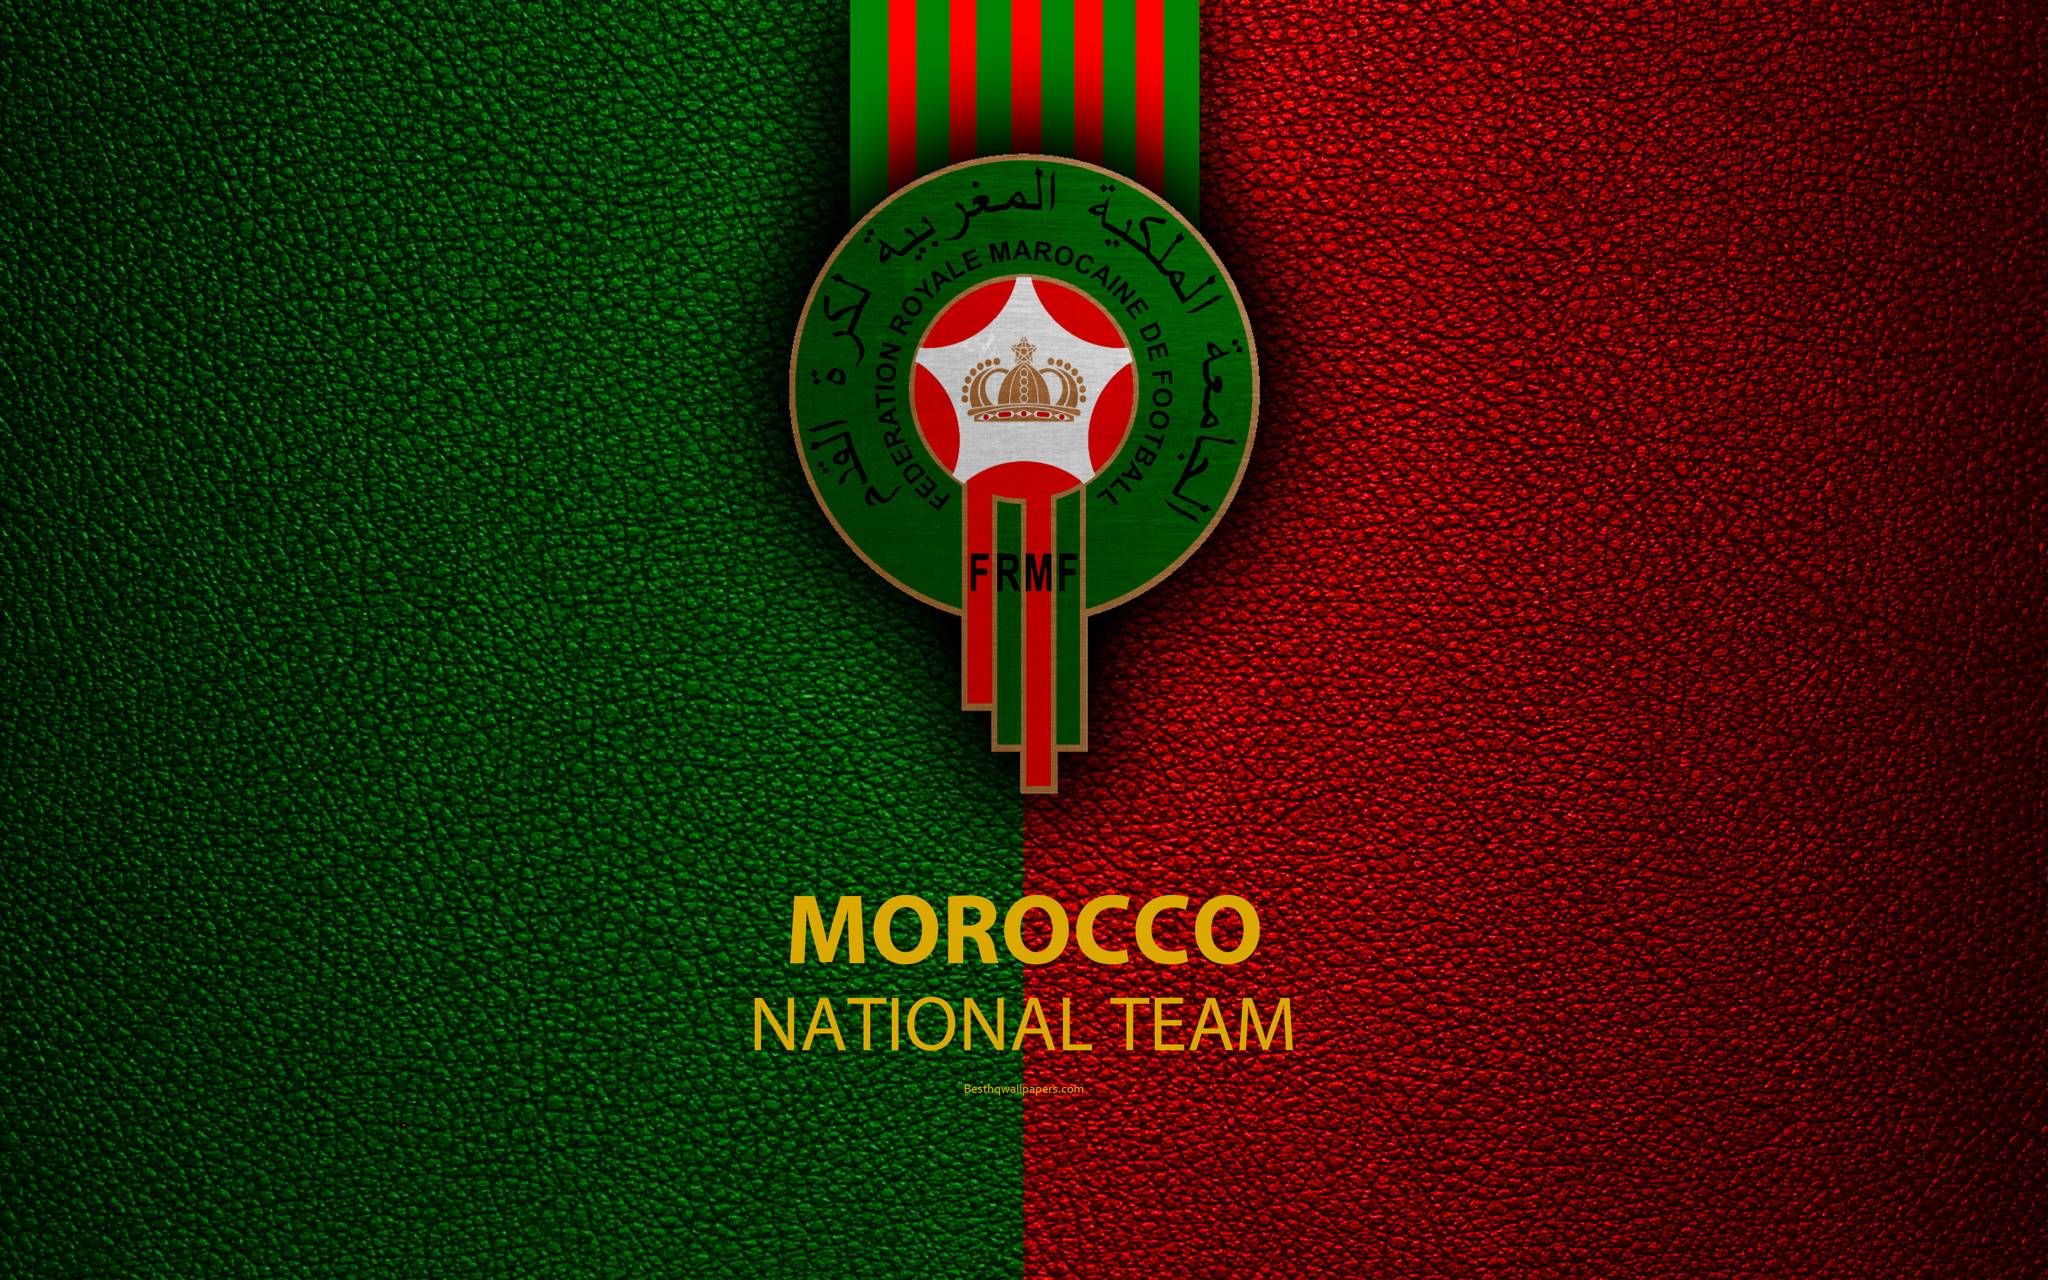 Download Morocco Football Wallpaper by ElnazTajaddod now. Browse millions of popular africa. Equipe maroc, Football marocain, Maroc football